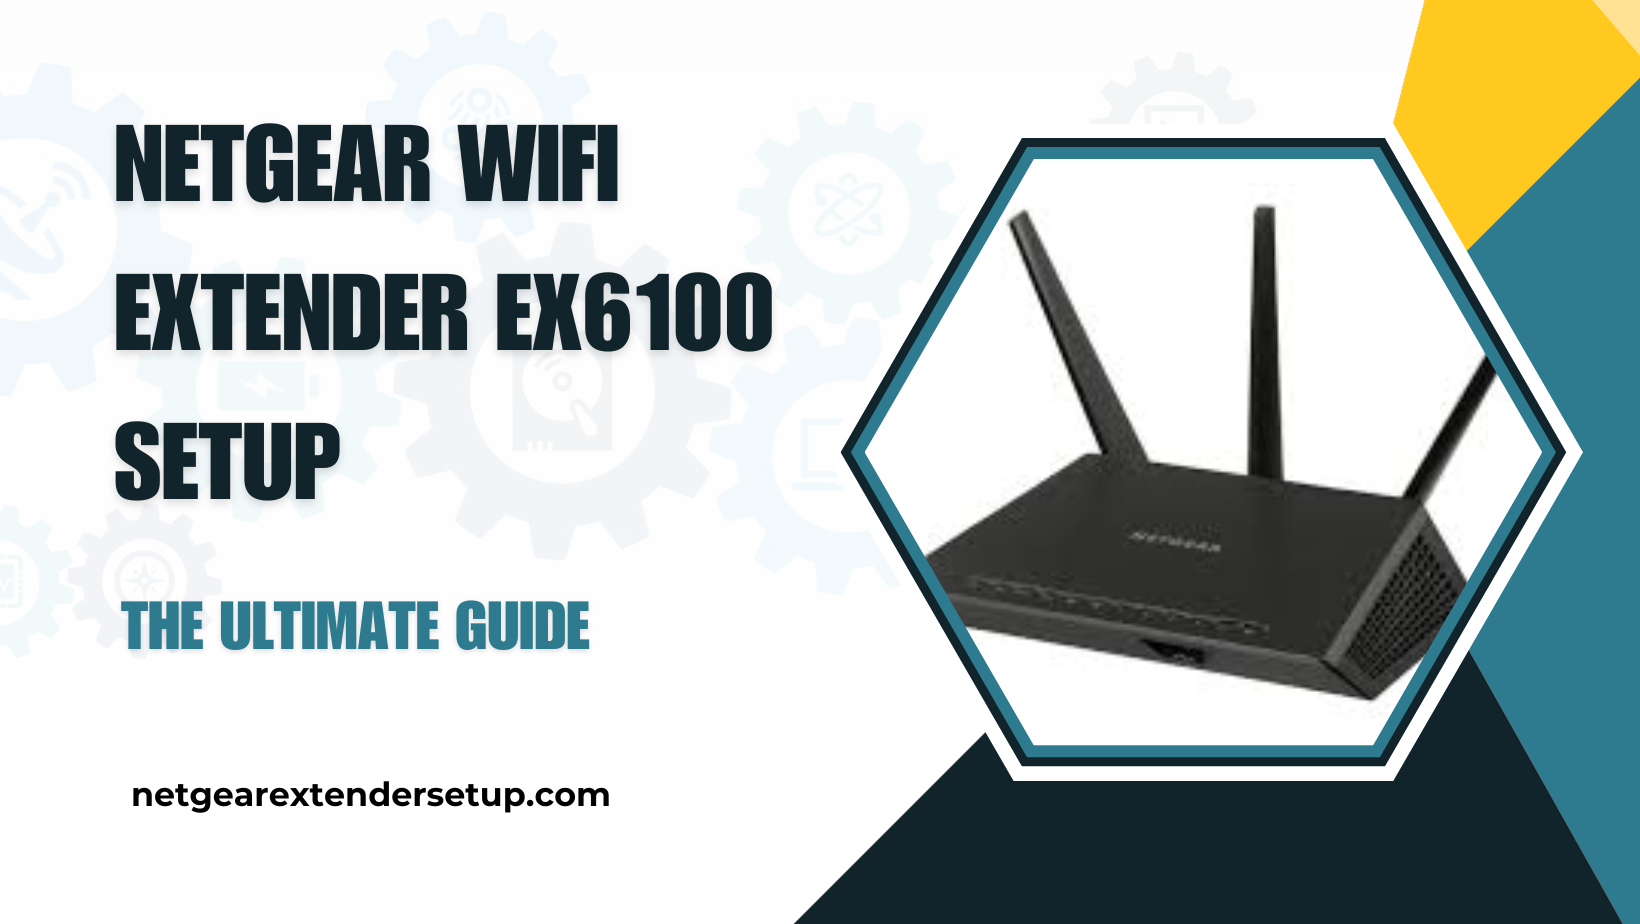 You are currently viewing Netgear WiFi Extender EX6100 Setup: The Ultimate Guide